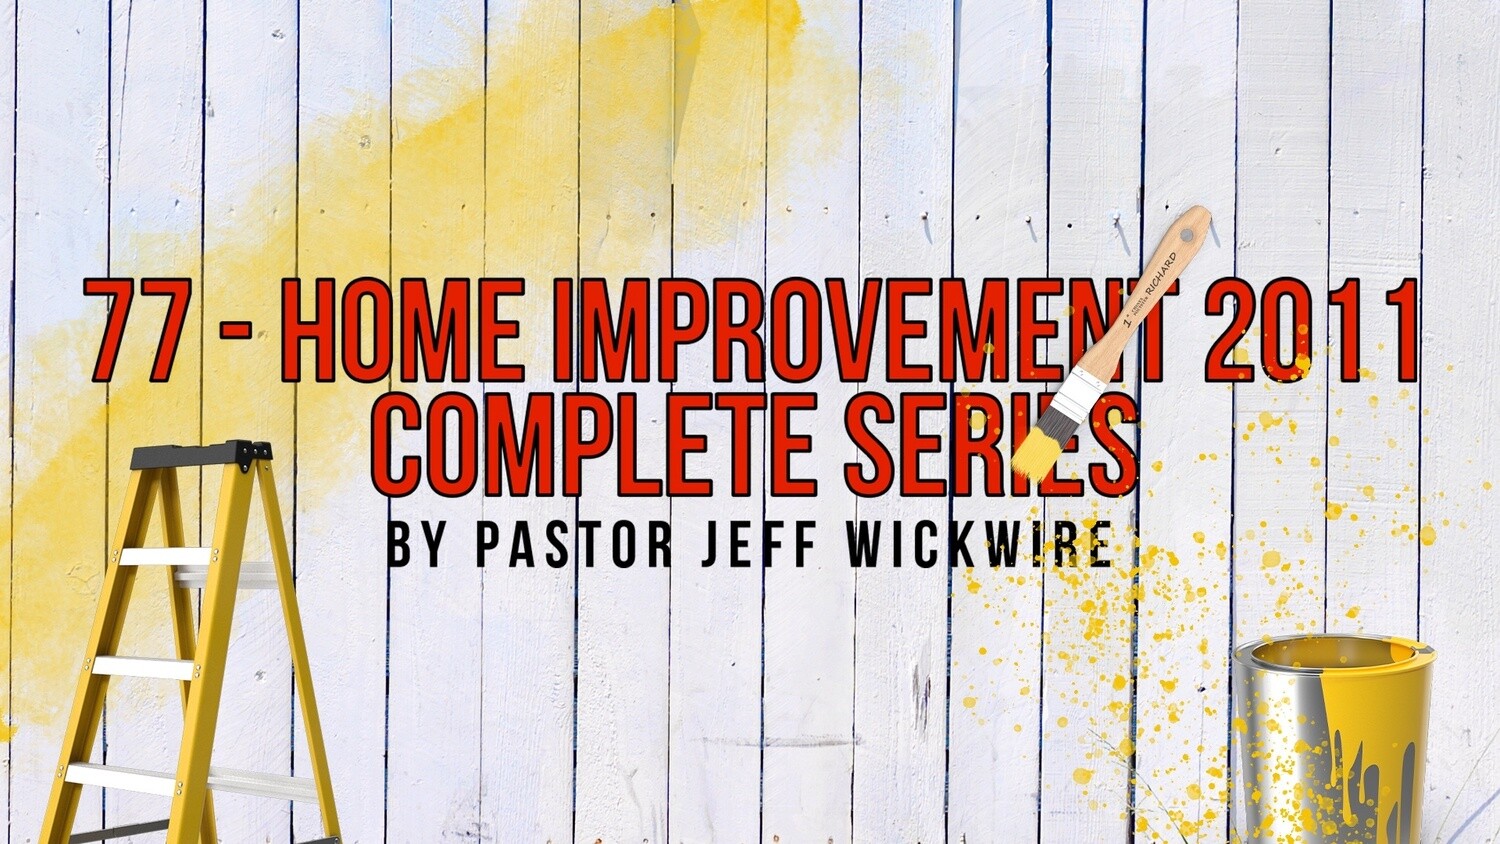 77 - Home Improvement 2011 - Complete Series By Pastor Jeff Wickwire